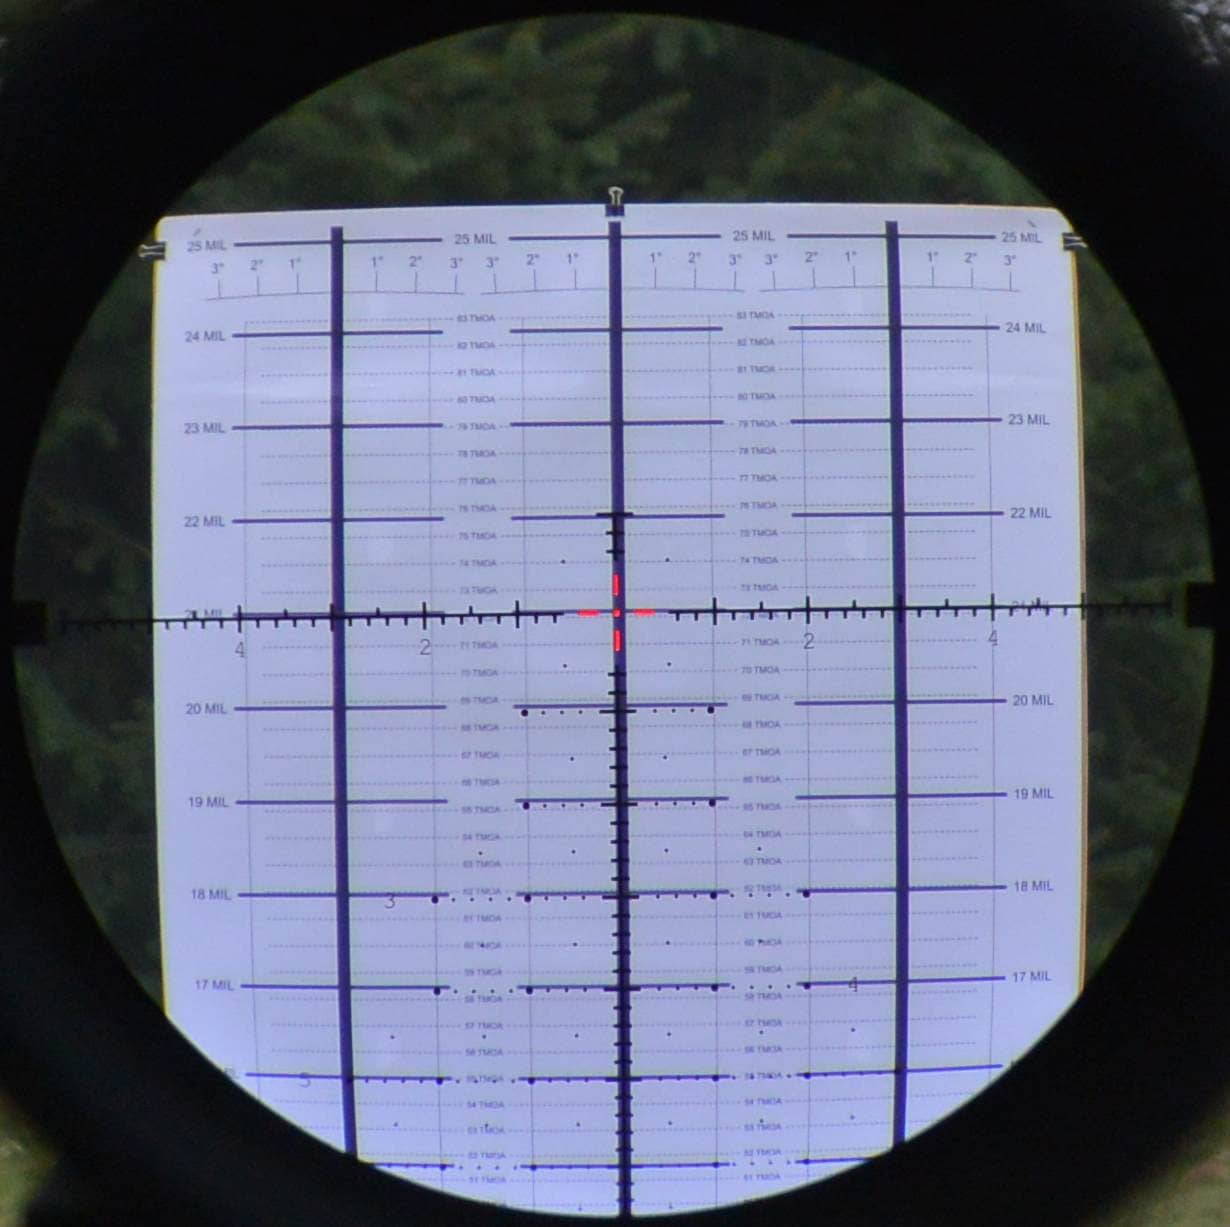 ILya's MRAD RD Reticle in the Meopta Optika6 5-30x56 RD FFP scope on the HORUS CATS target at 30x